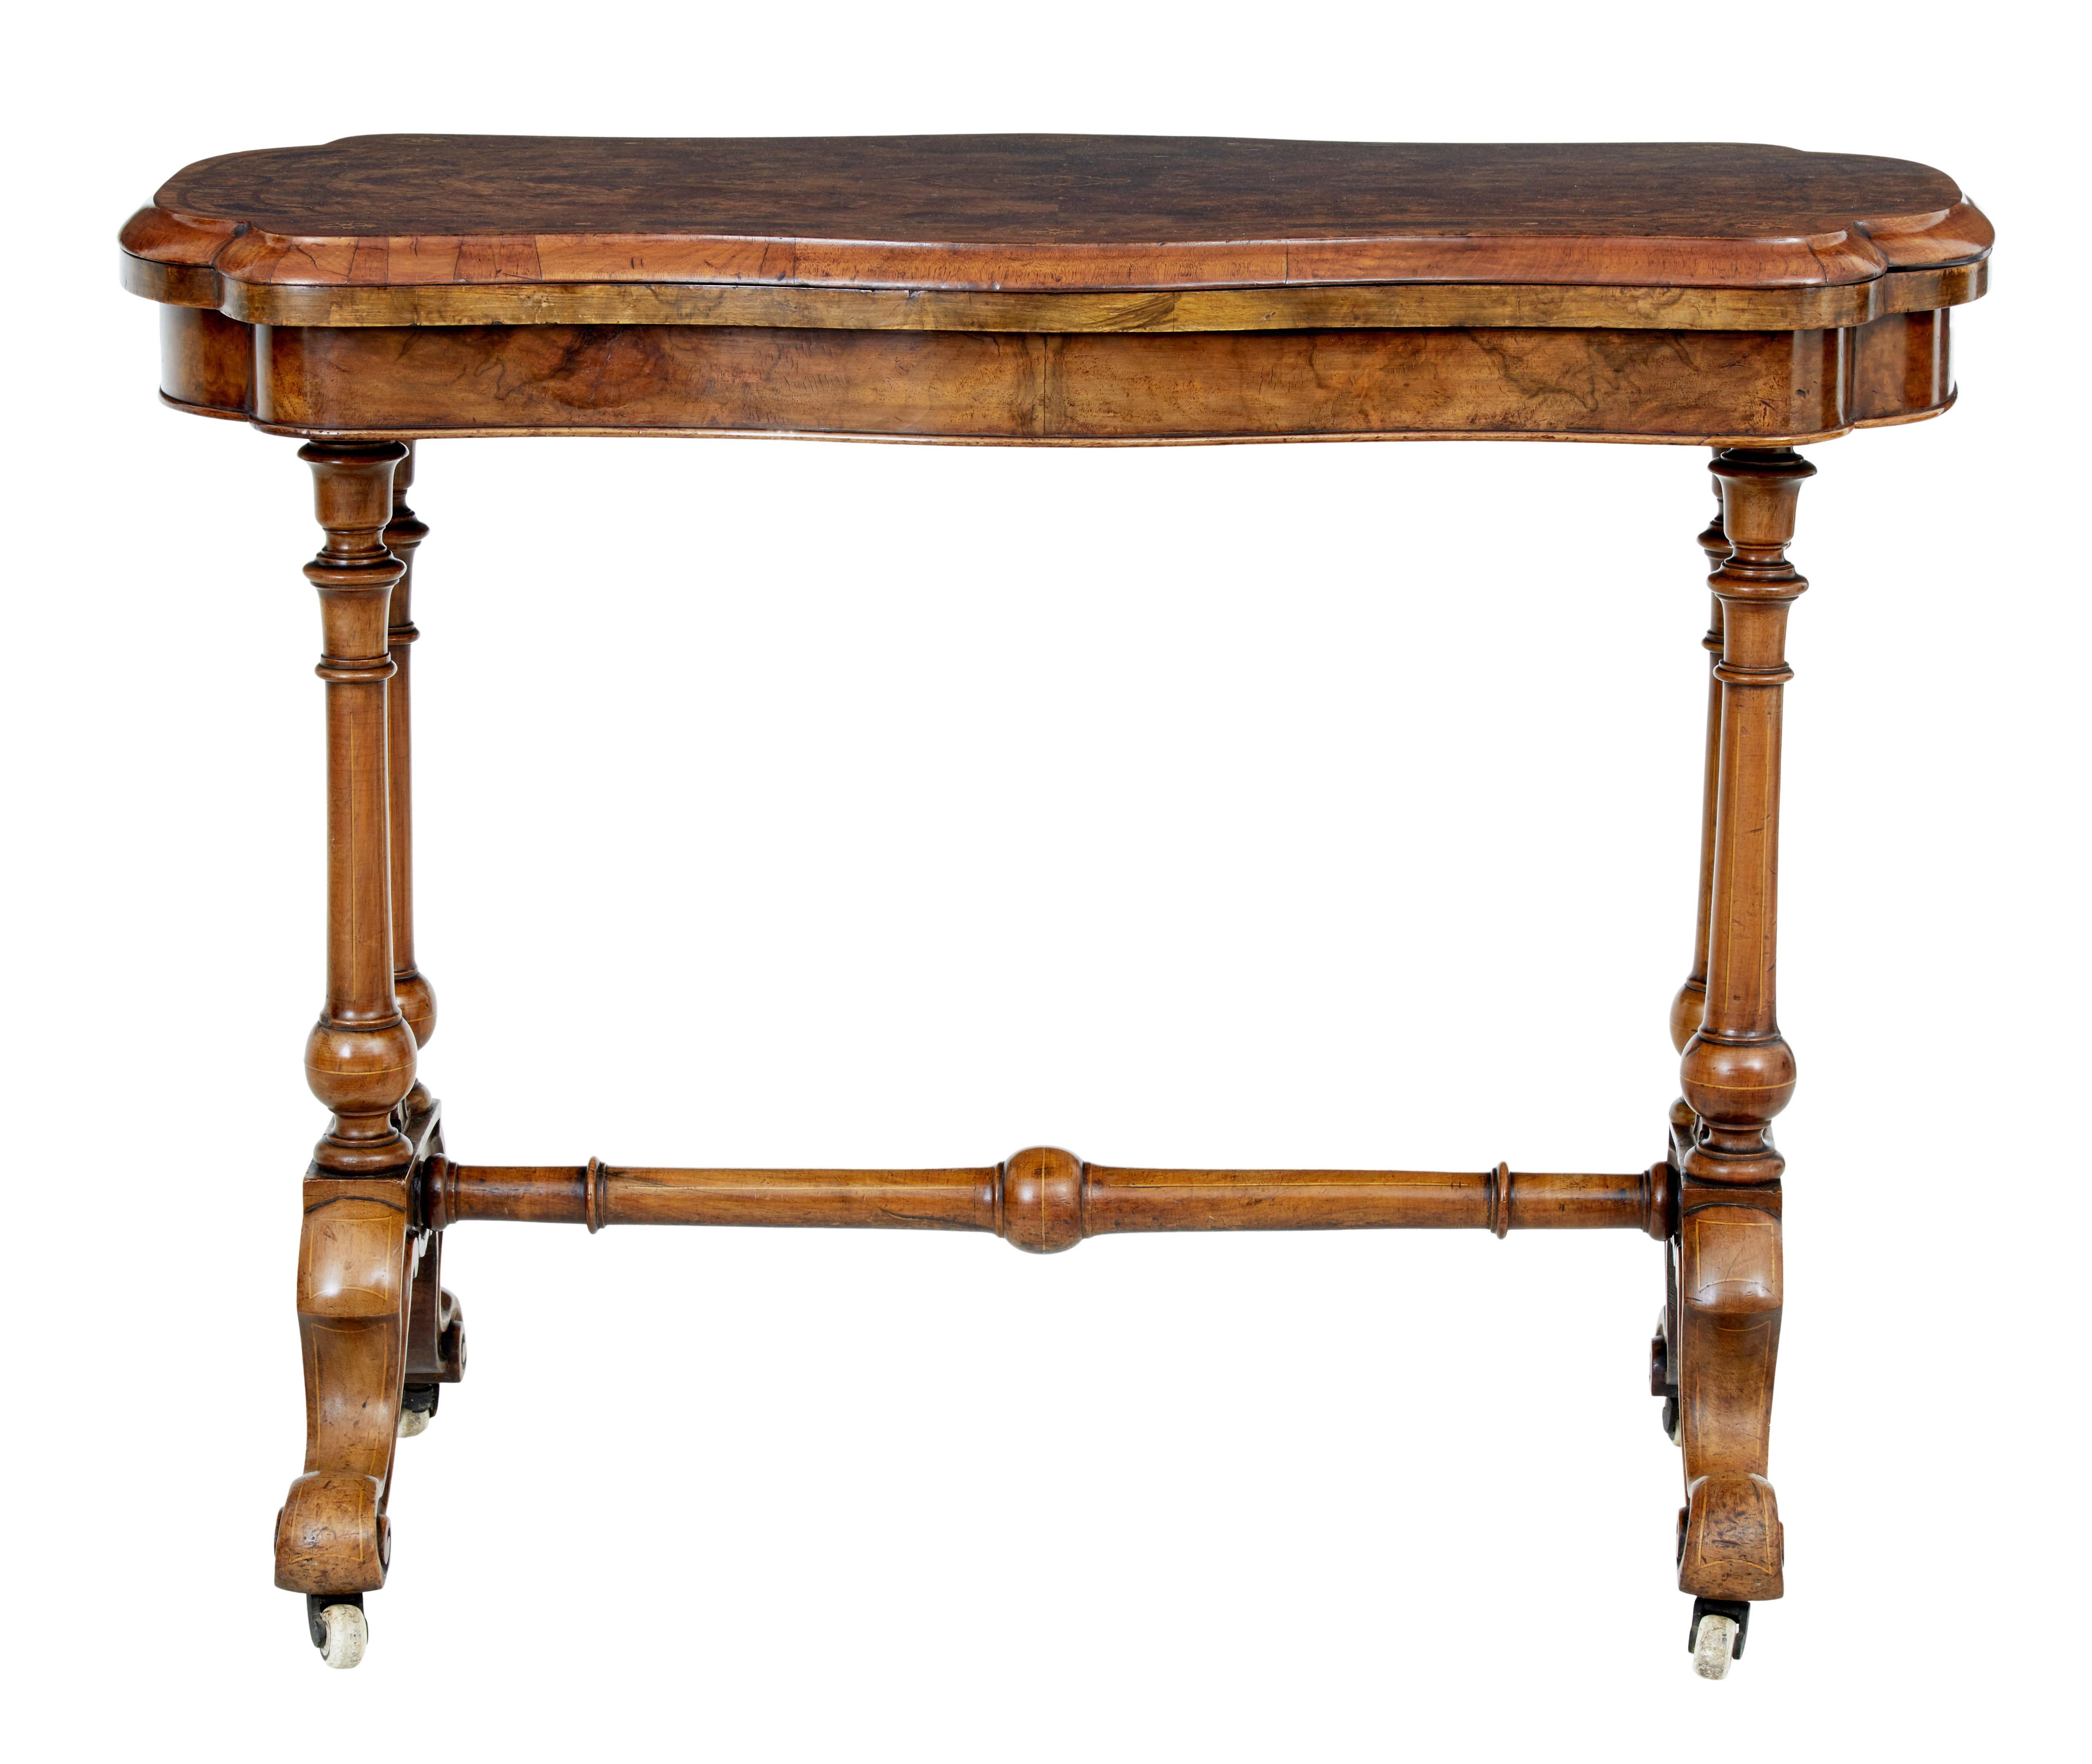 Decorative high Victorian walnut card table circa 1870.

Shaped burr walnut top with inlaid patterns and cross banded decoration.  Top swivels to reveal a storage well and opens to a green baize playing surface.

Standing on 4 turned legs united by